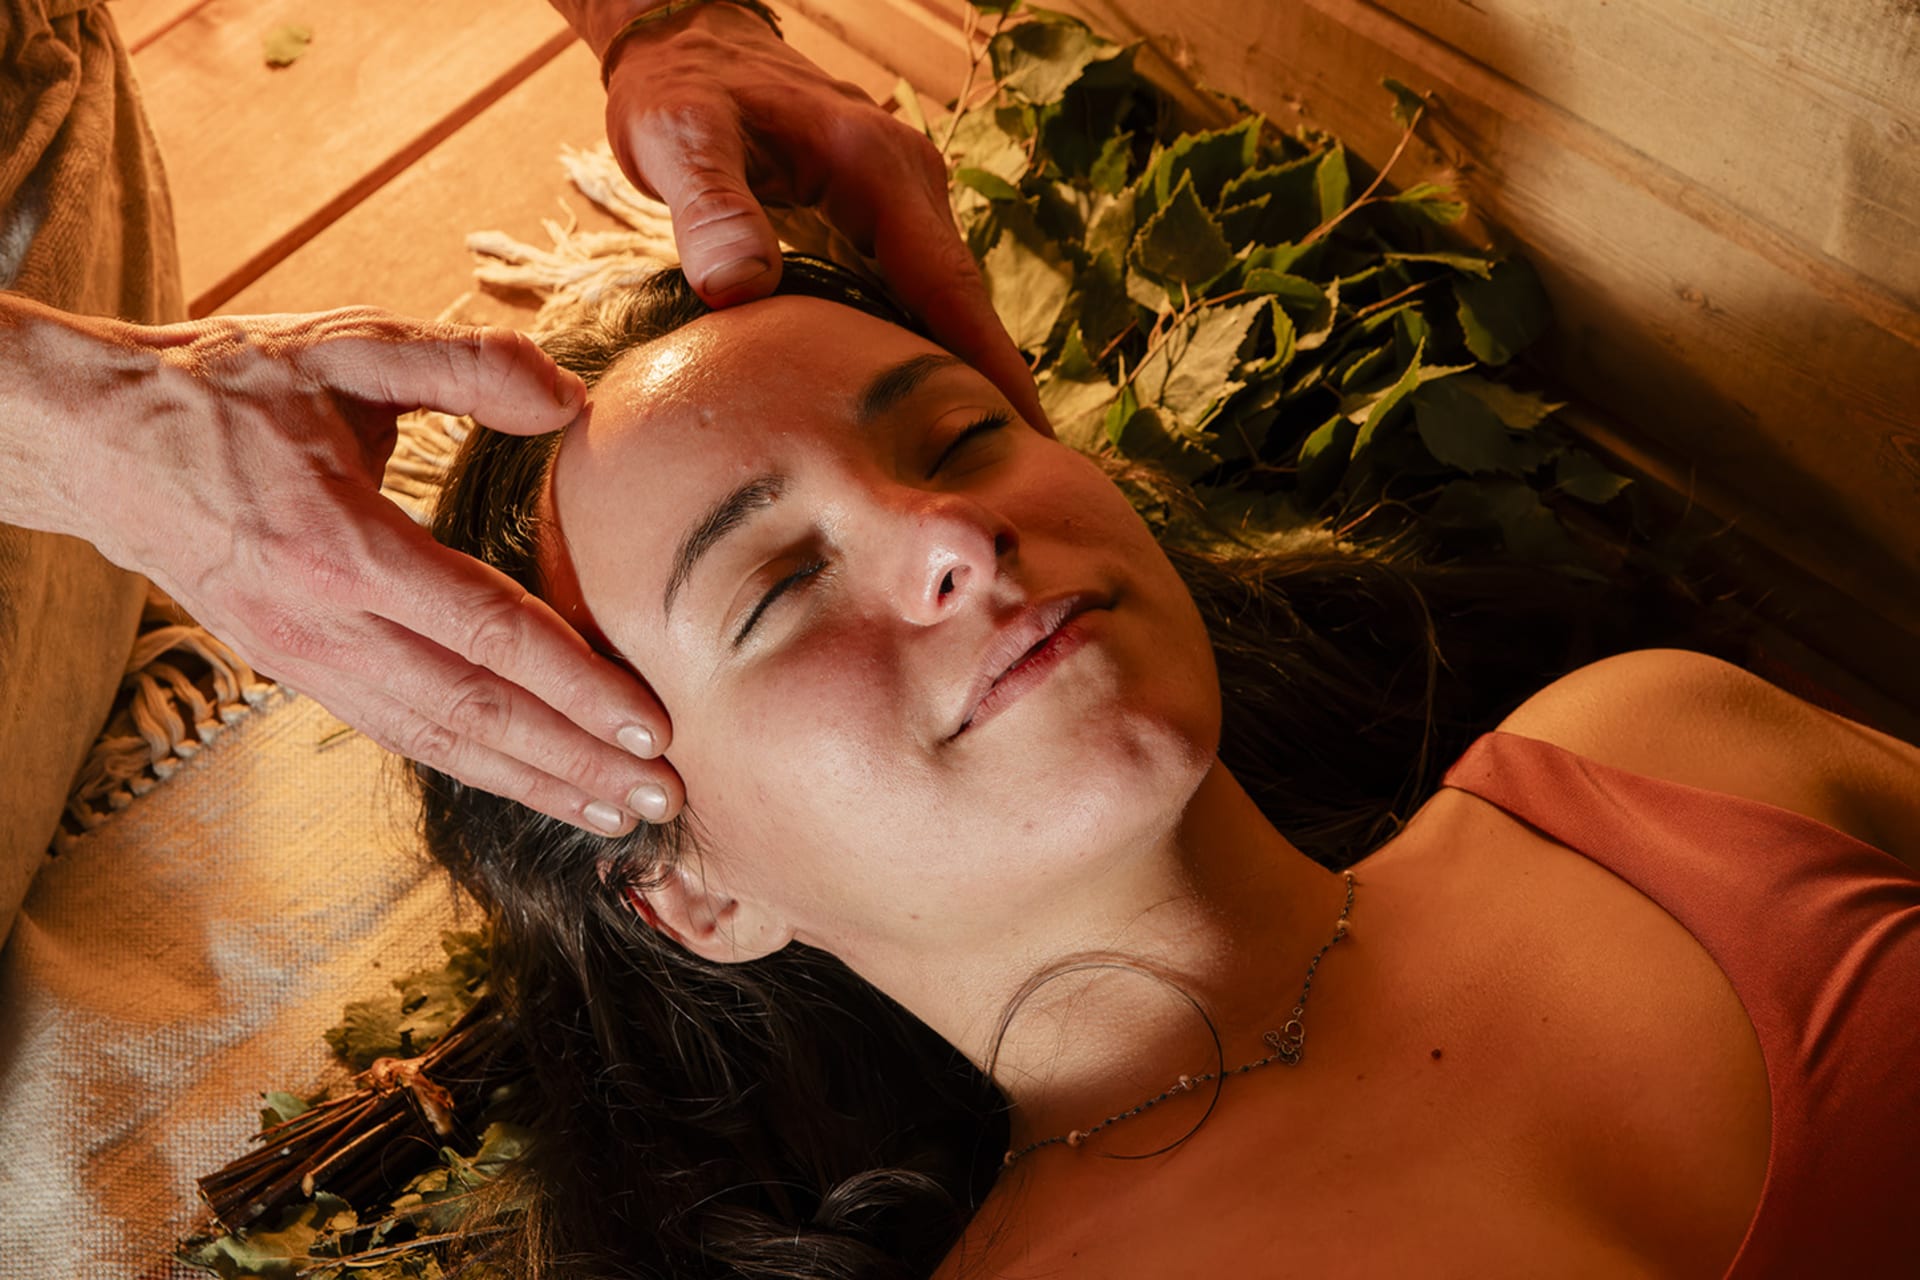 We offer healing sauna treatments for individuals, couples or small groups.